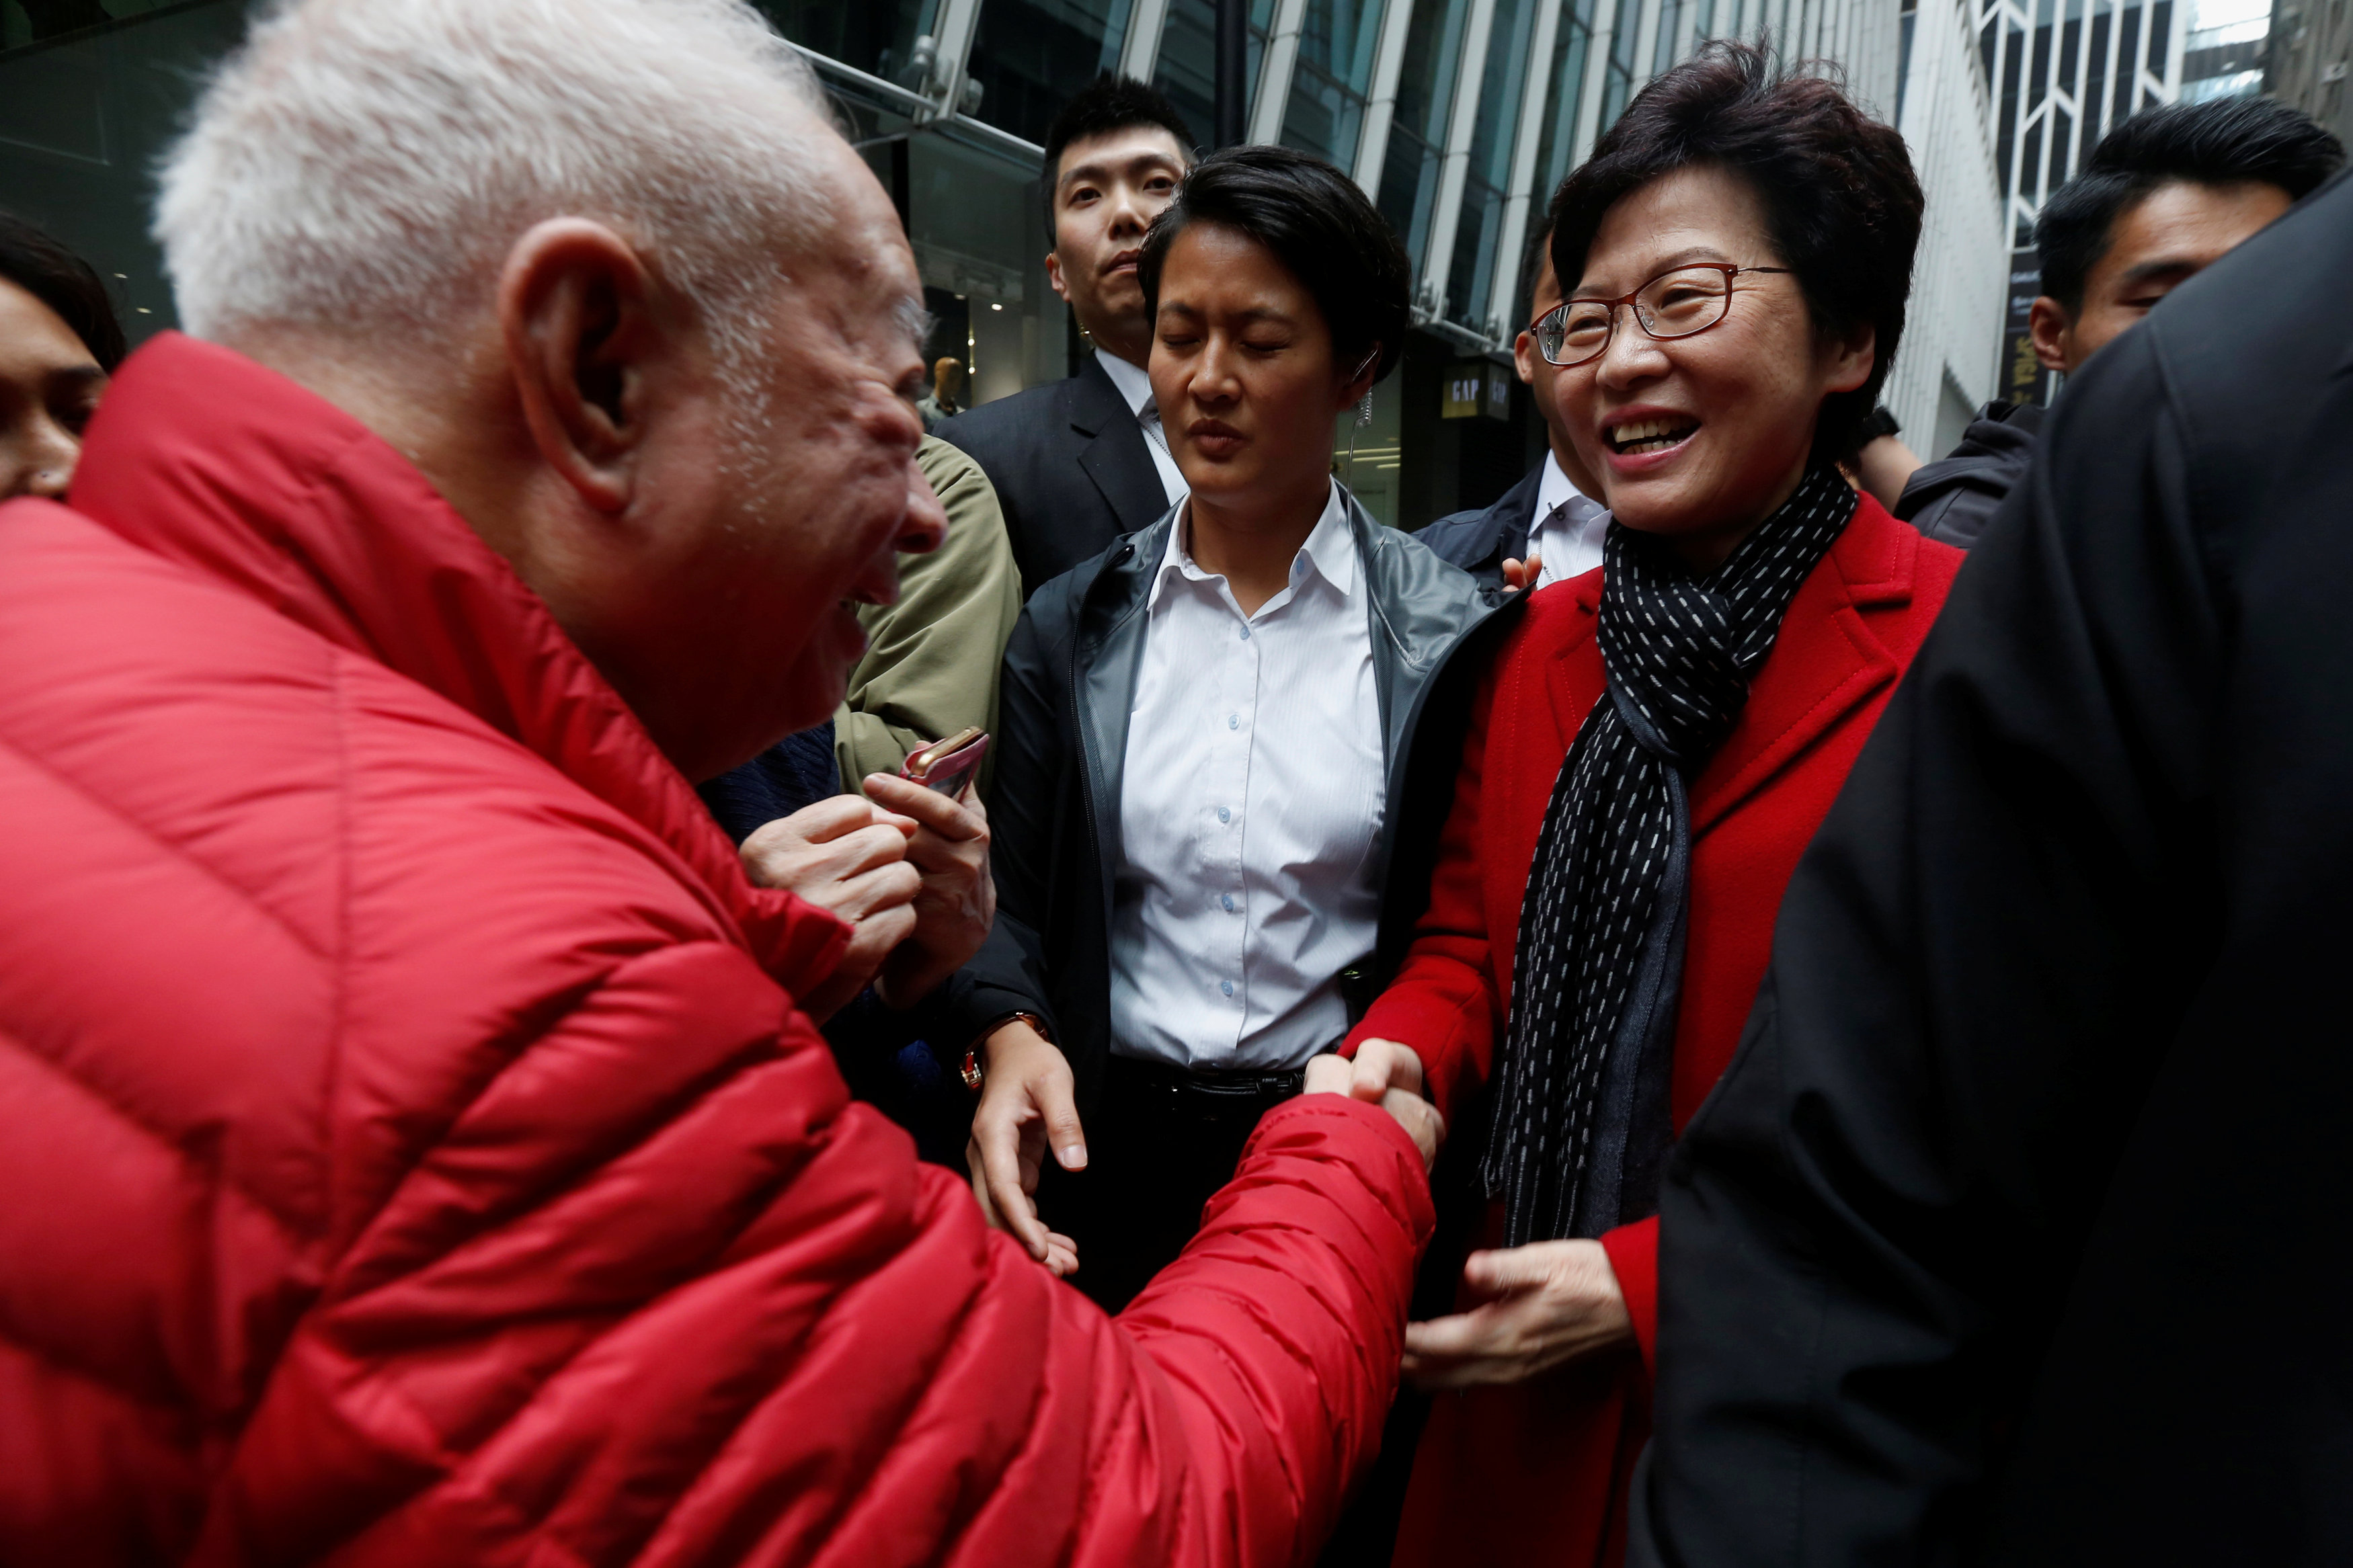 A man shakes hands with Carrie Lam, chief executive-elect, a day after she was elected in Hong Kong. Photo: Bobby Yip/Reuters